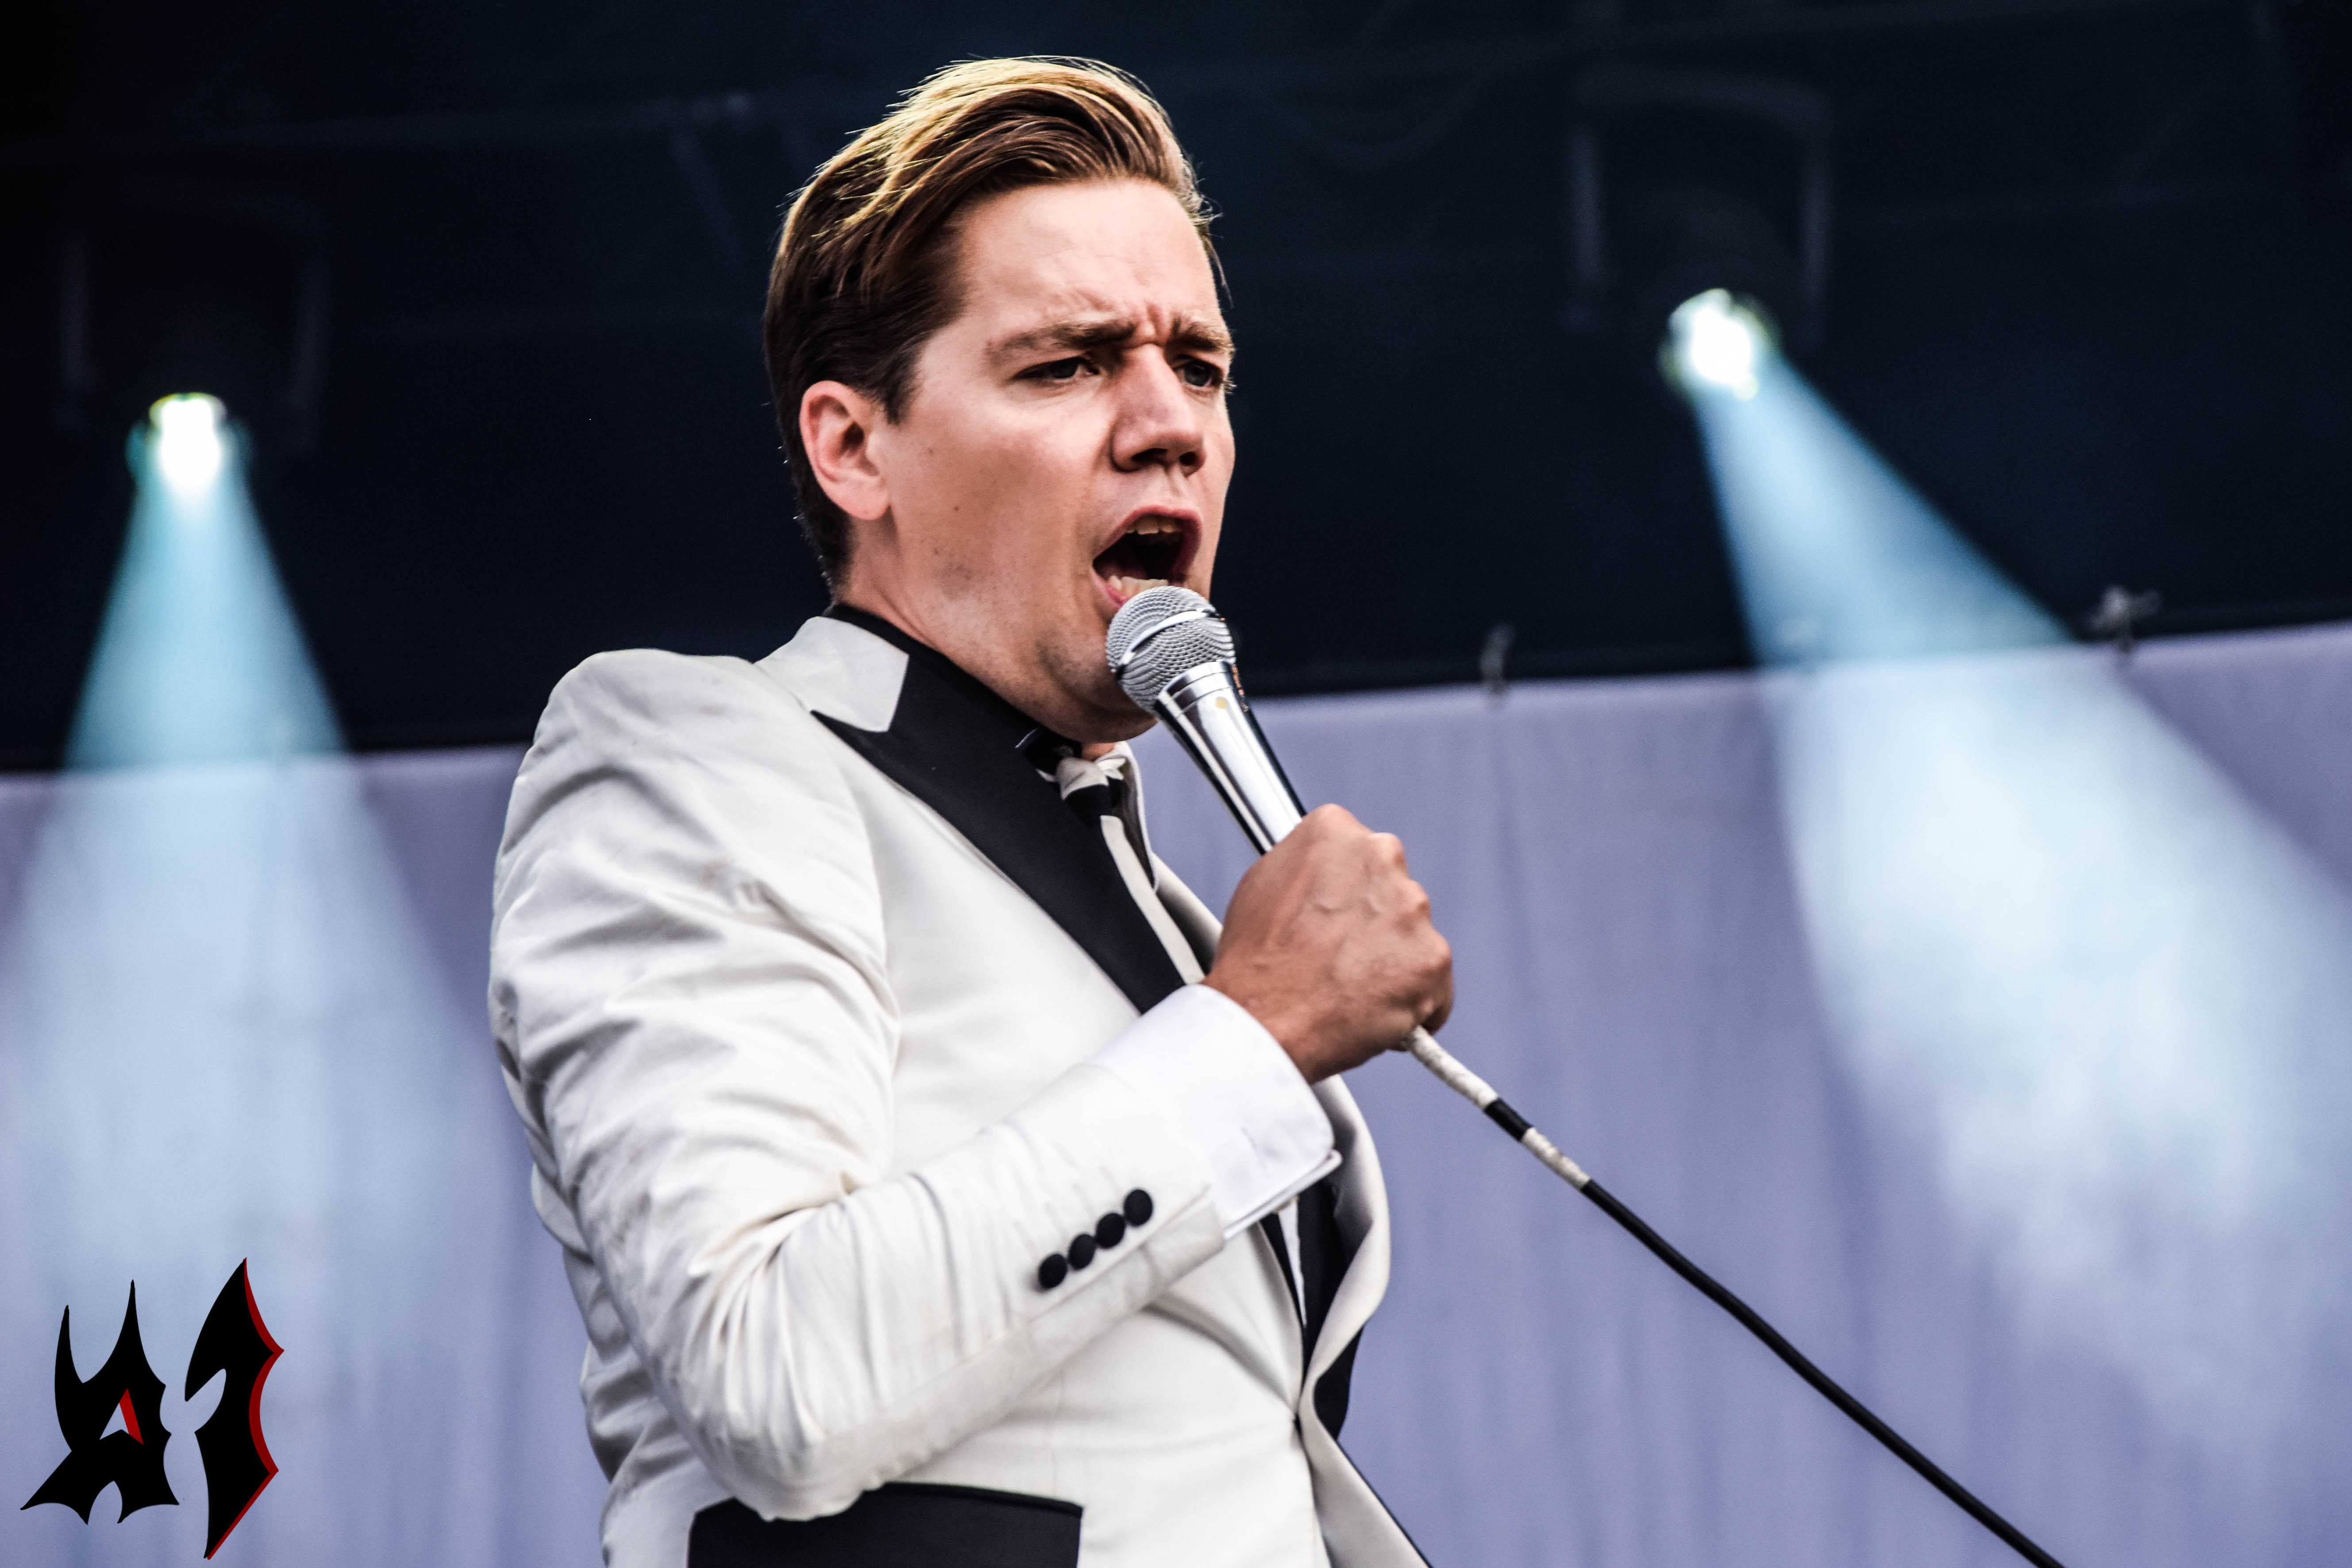 Donwload 2018 – Day 3 - The Hives 9